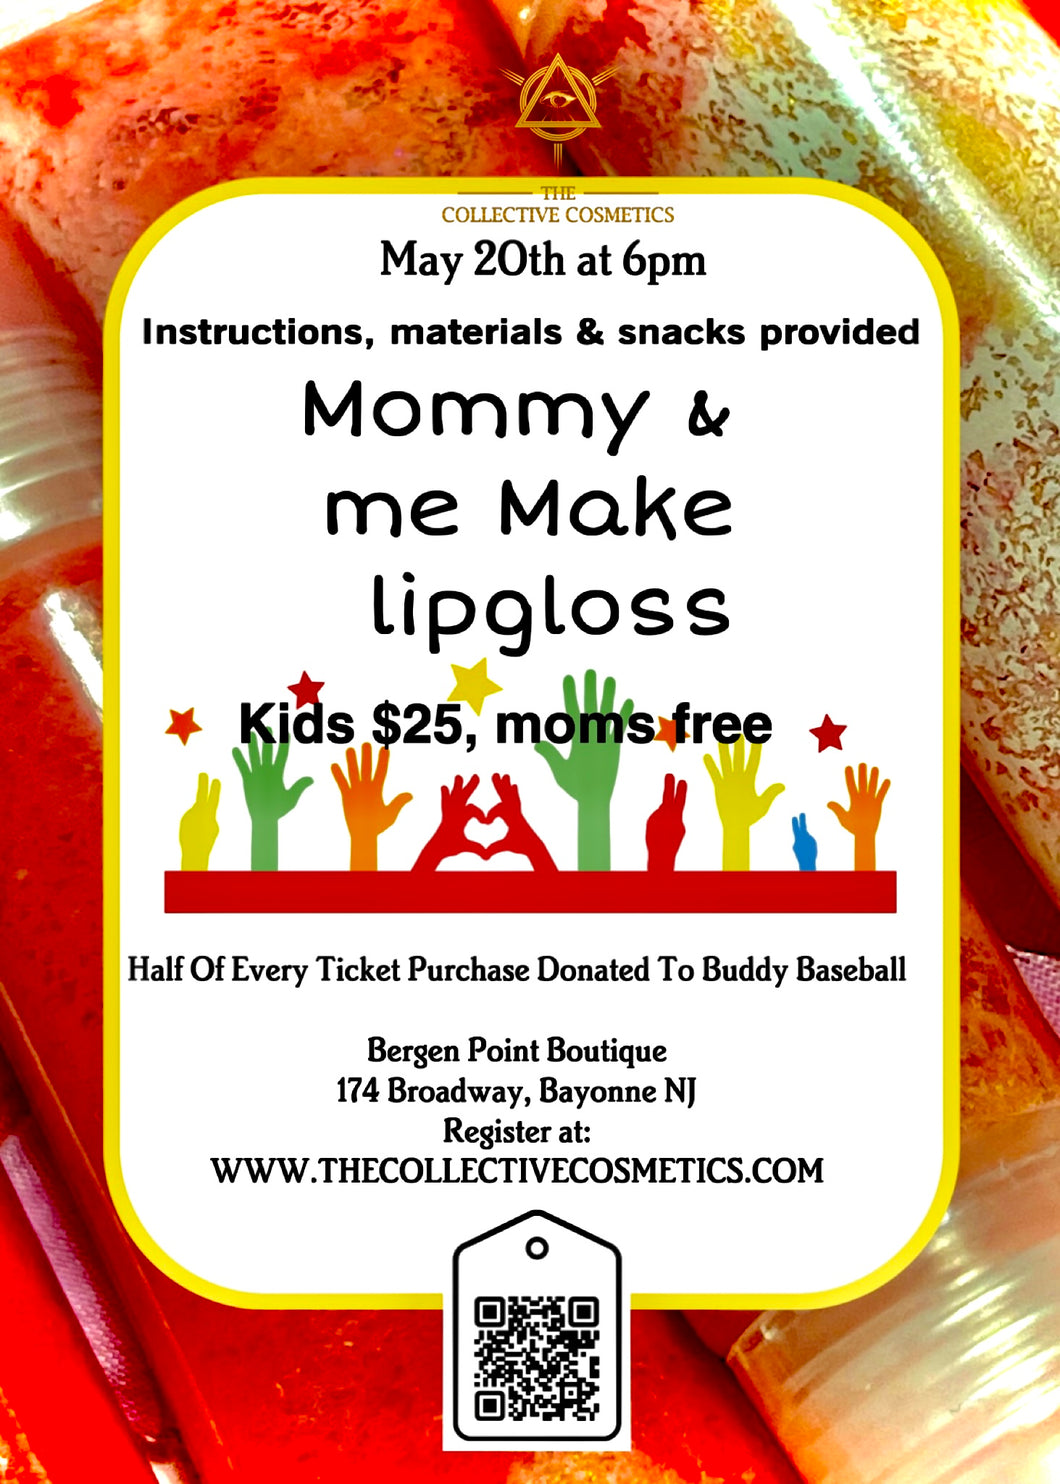 Mommy & Me Make Lipgloss Event